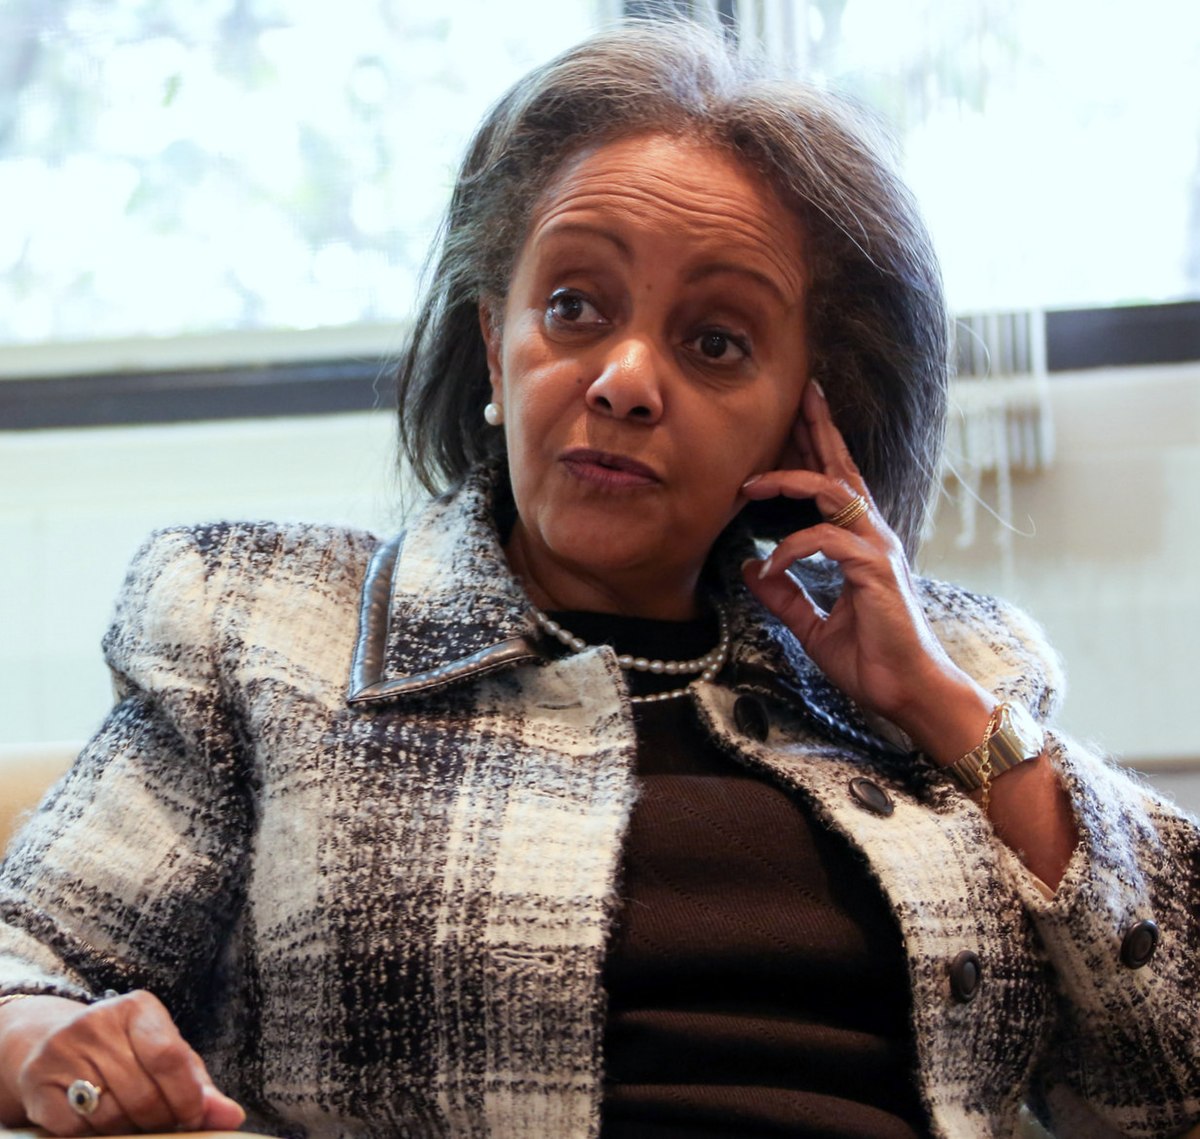 All you need to know about Sahle-Work Zewde, the career diplomat now Ethiopia’s first female president